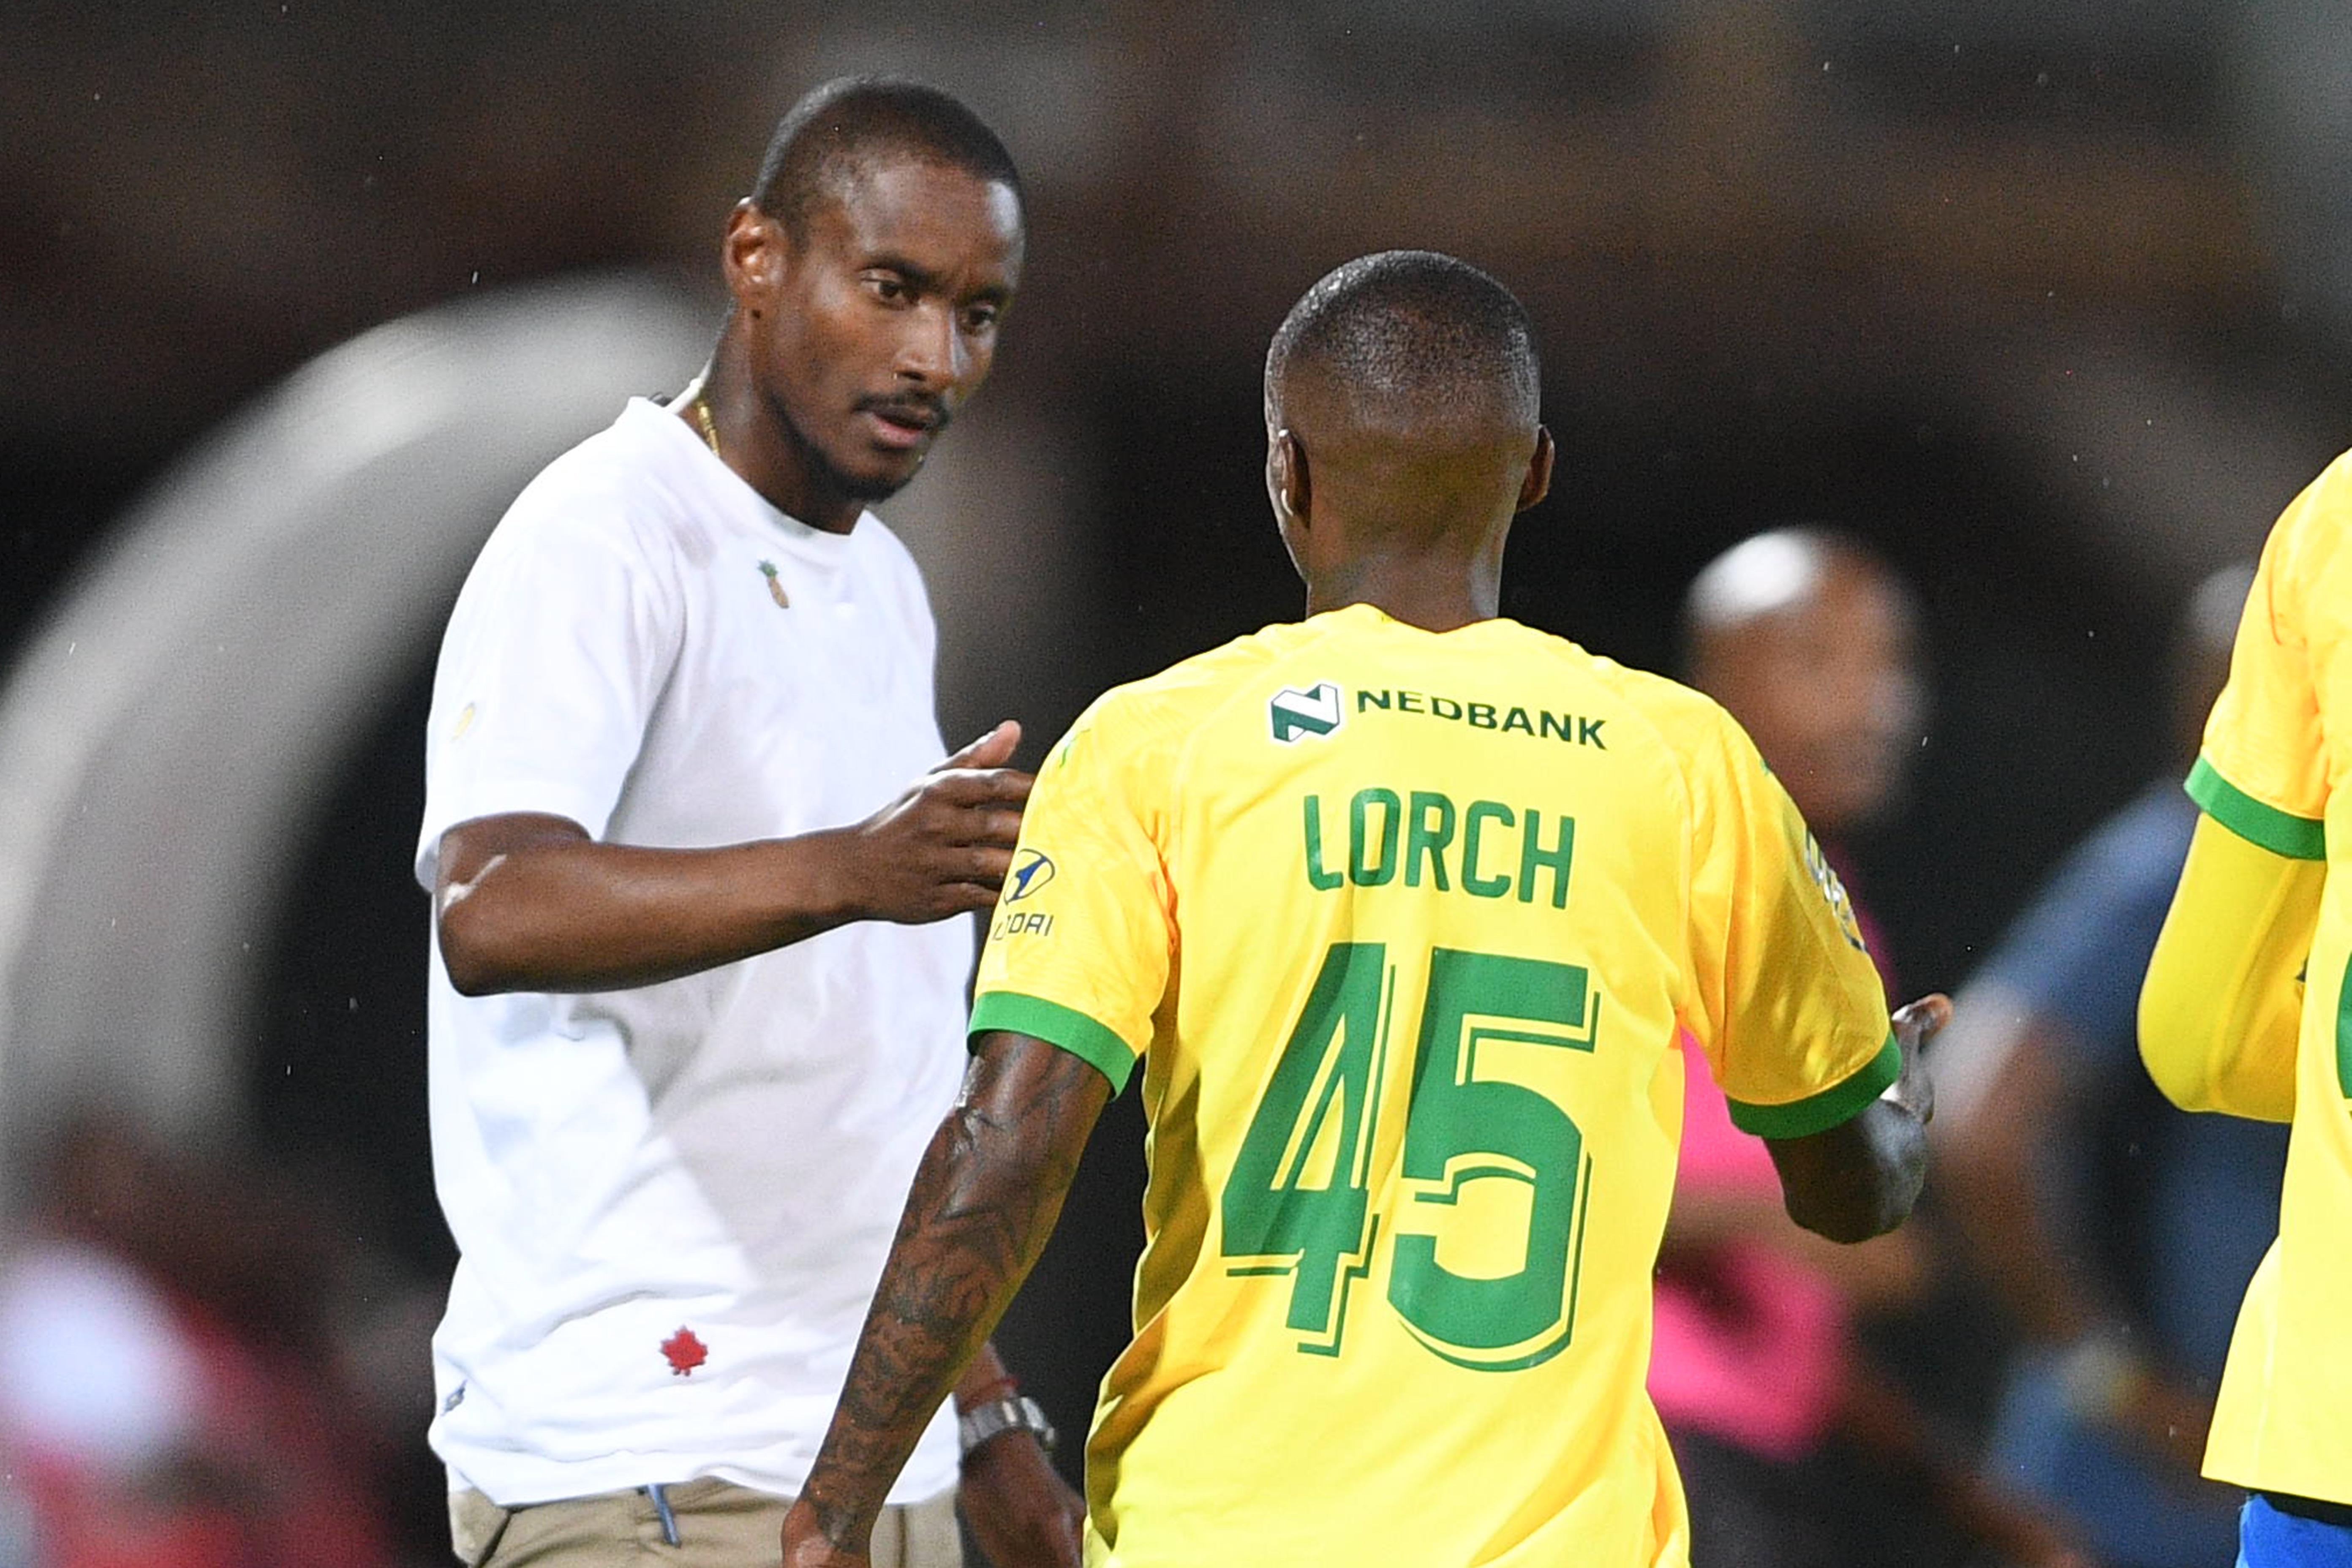 Rulani: My biggest disappointment with Lorch